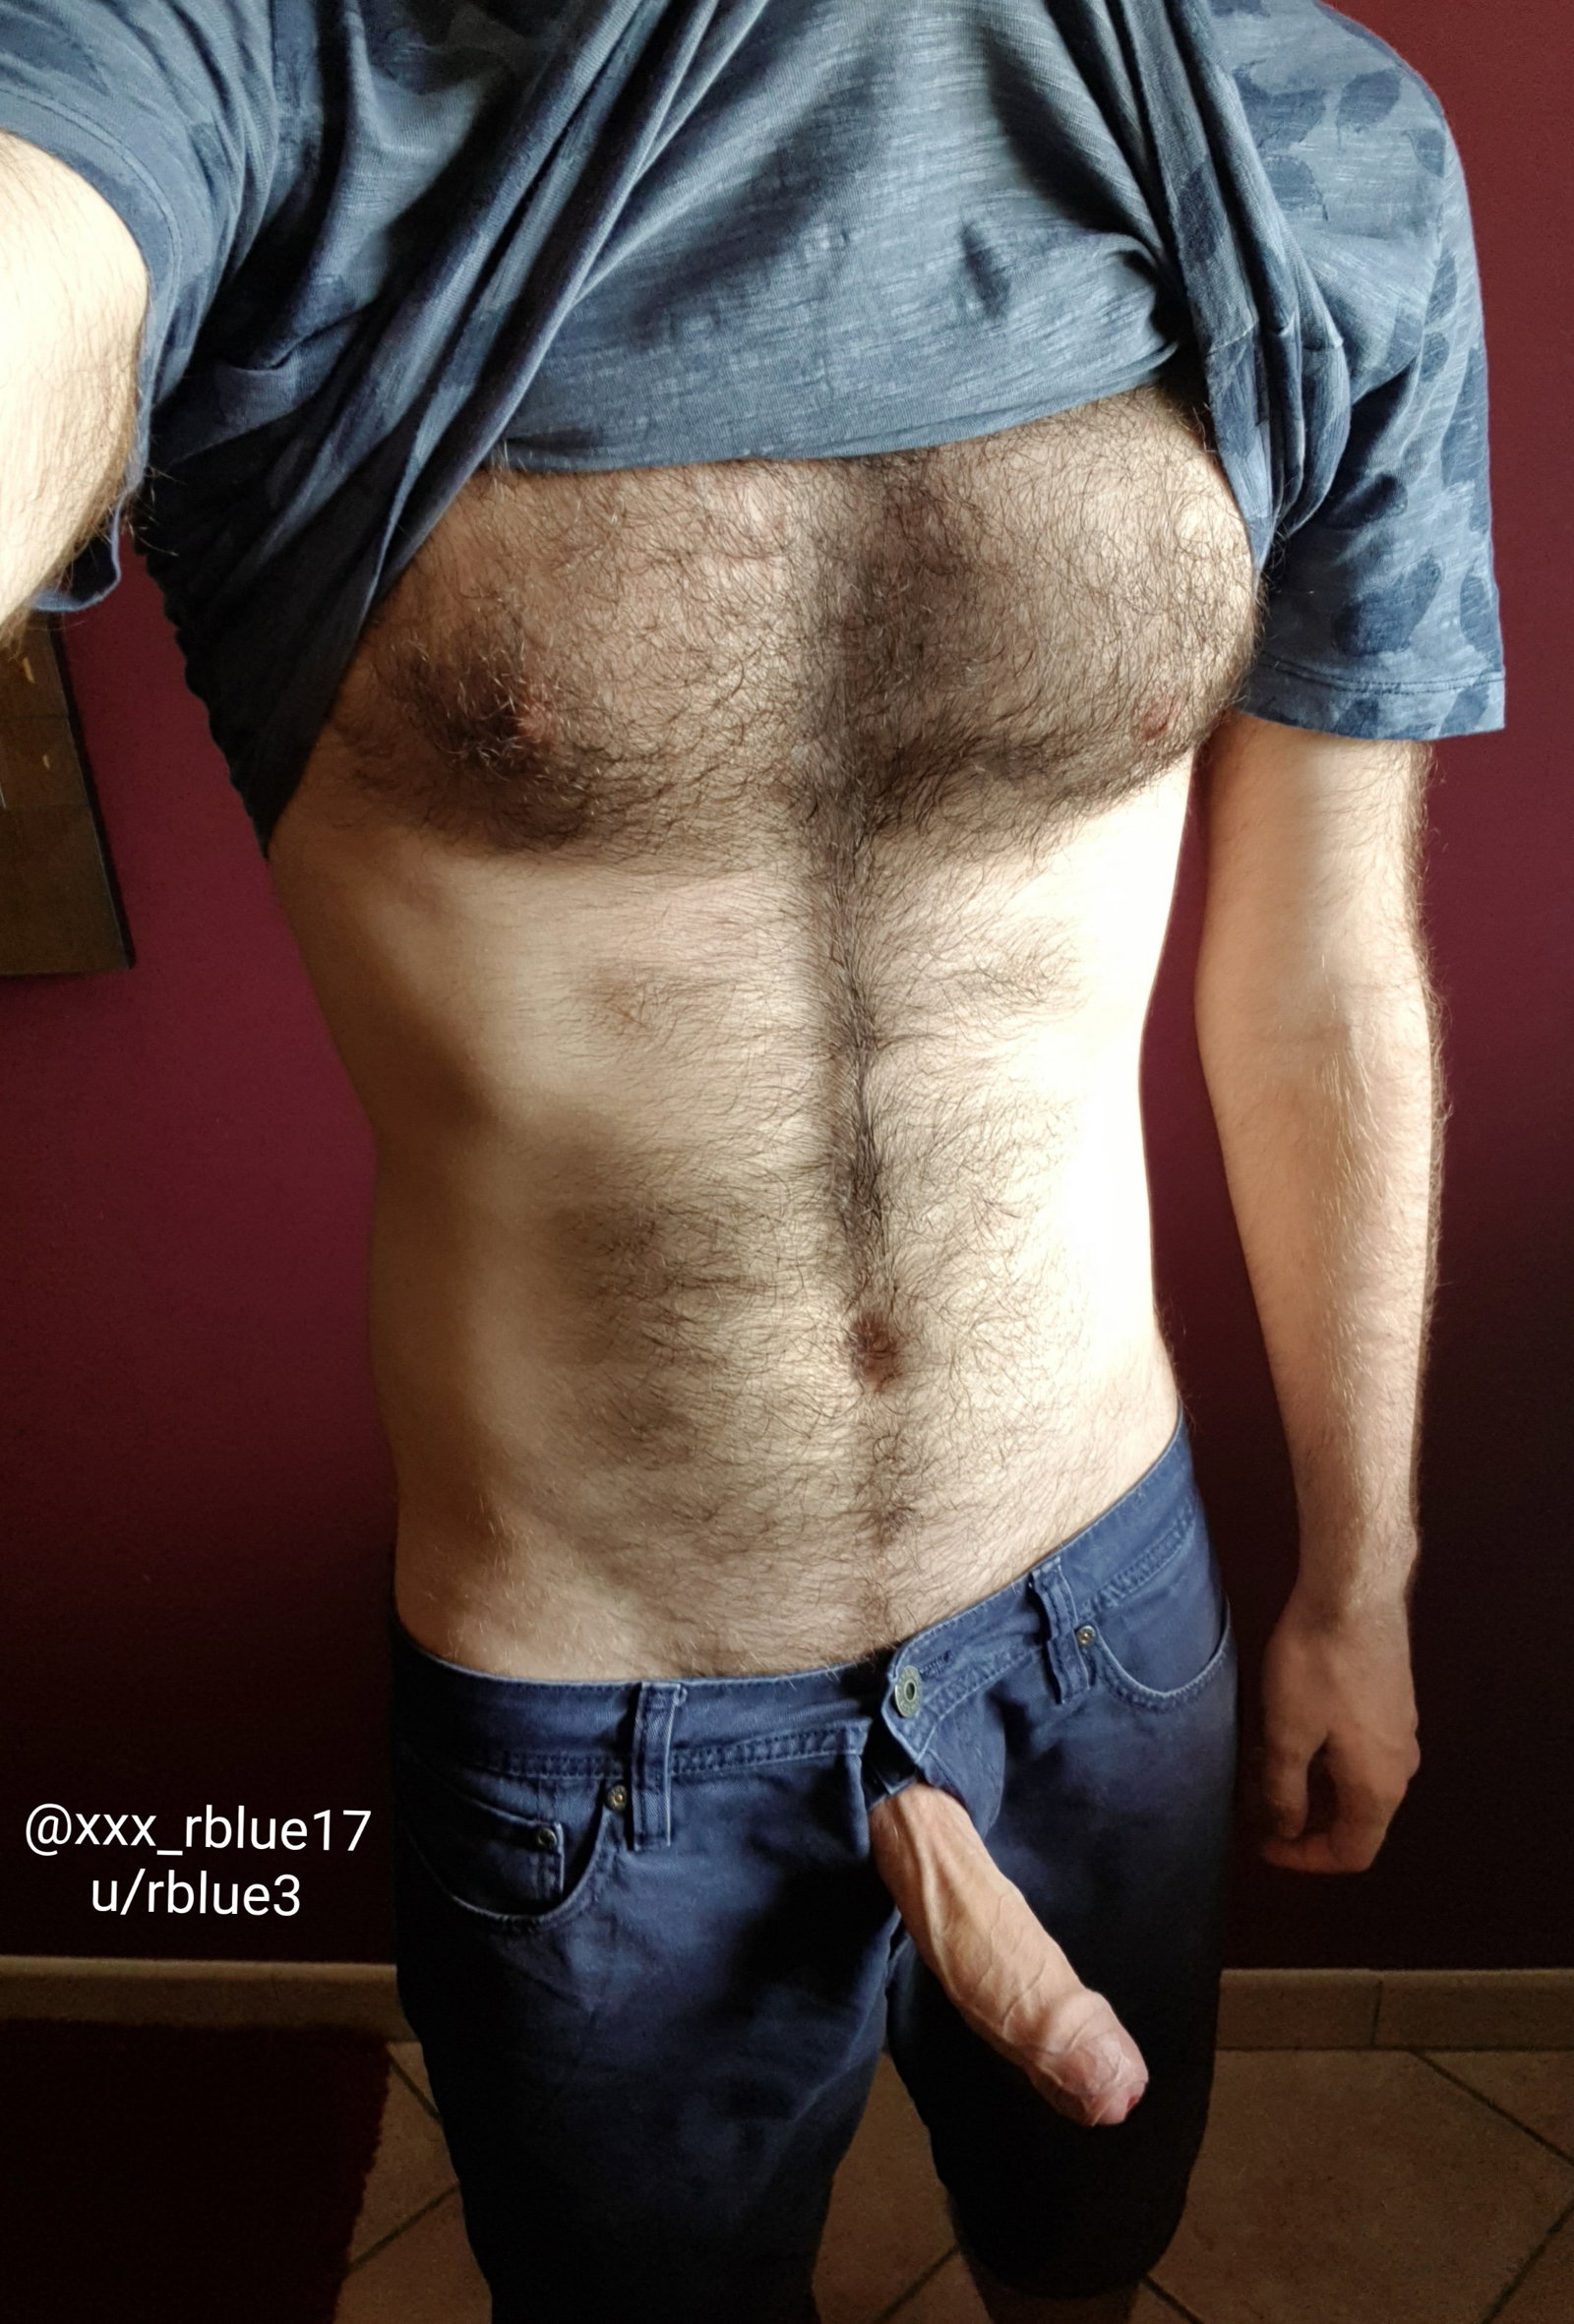 Watch the Photo by rblue with the username @rblue17, posted on August 10, 2019. The post is about the topic GayExTumblr. and the text says 'Here's the uncropped version of my new profile pic. What do you think?'